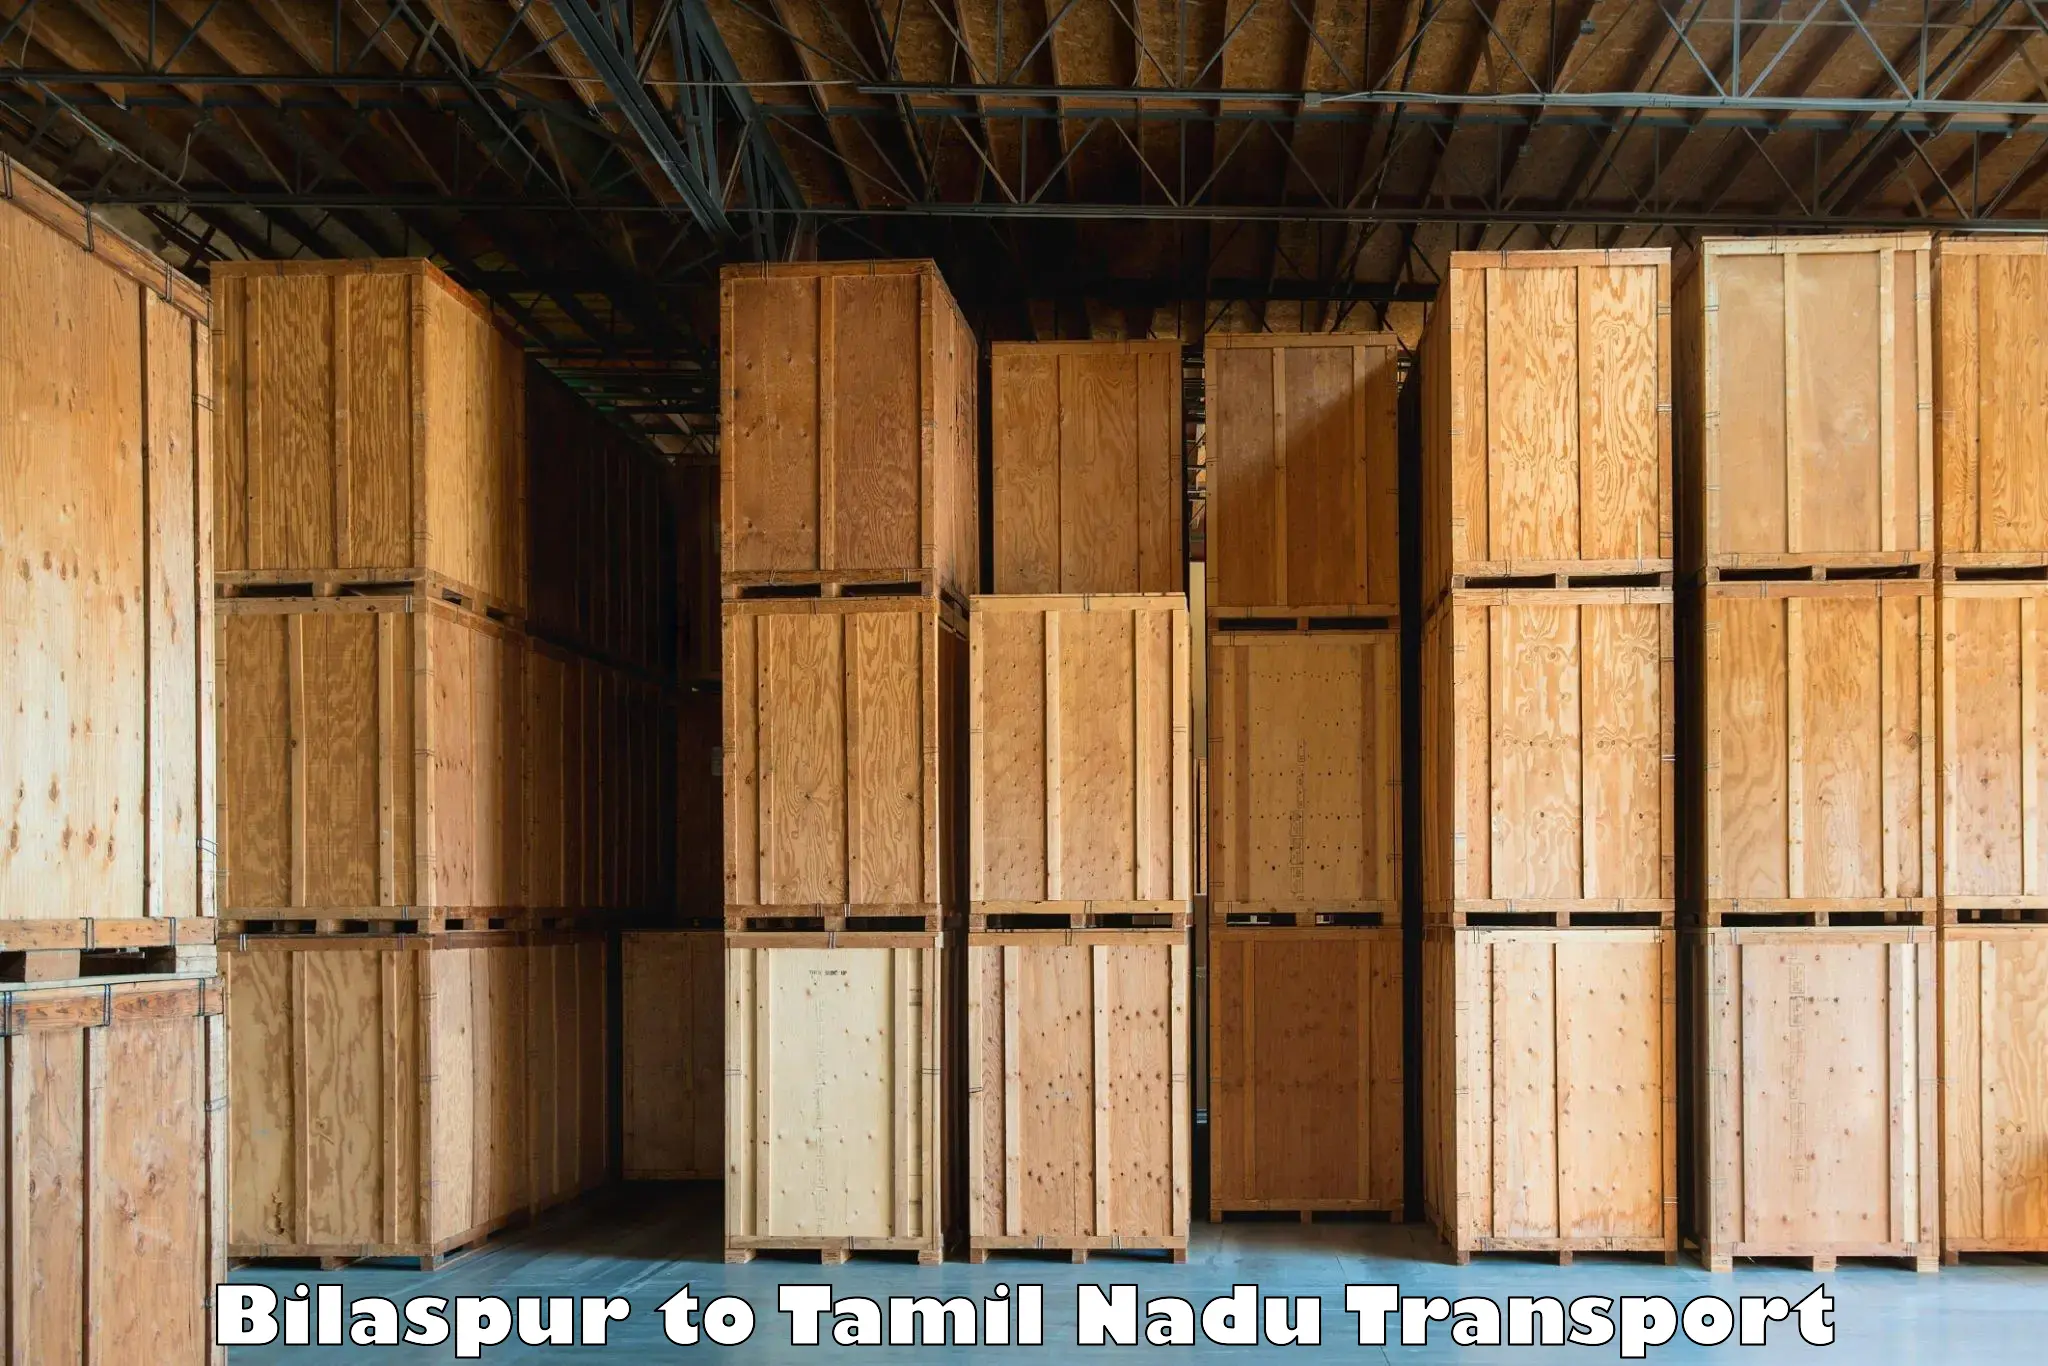 Daily parcel service transport in Bilaspur to Palayankottai